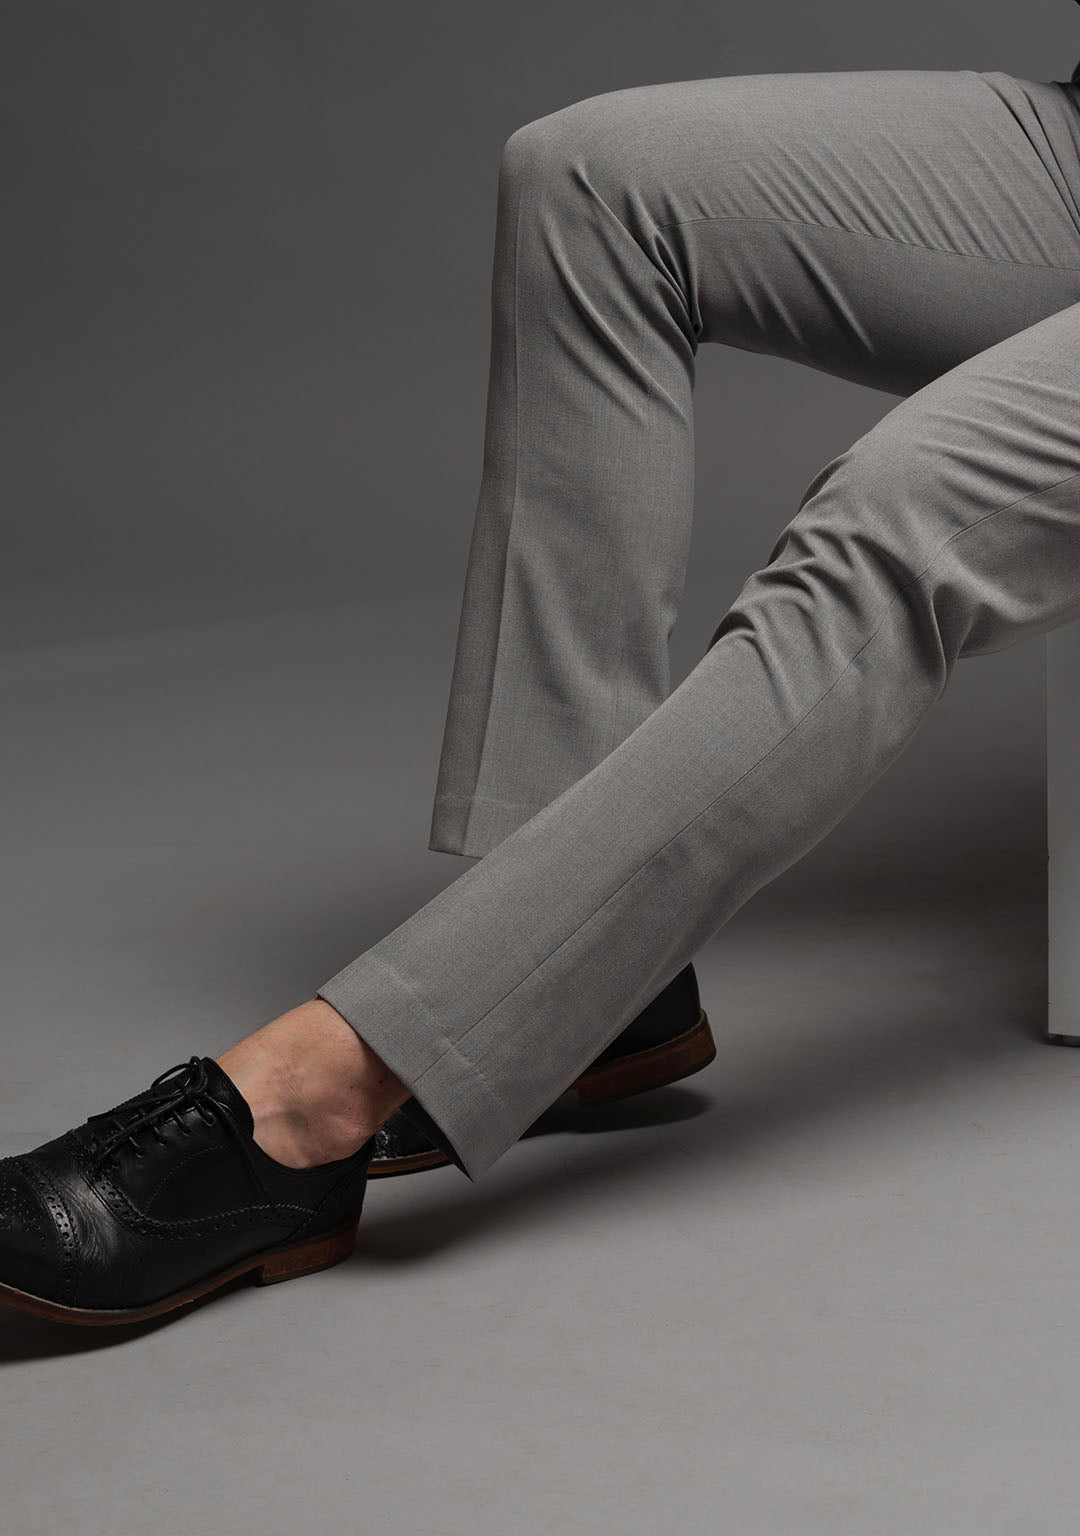 Men's Loafers: The Ultimate Guide to Buying & Styling Loafers - Boardroom  Socks